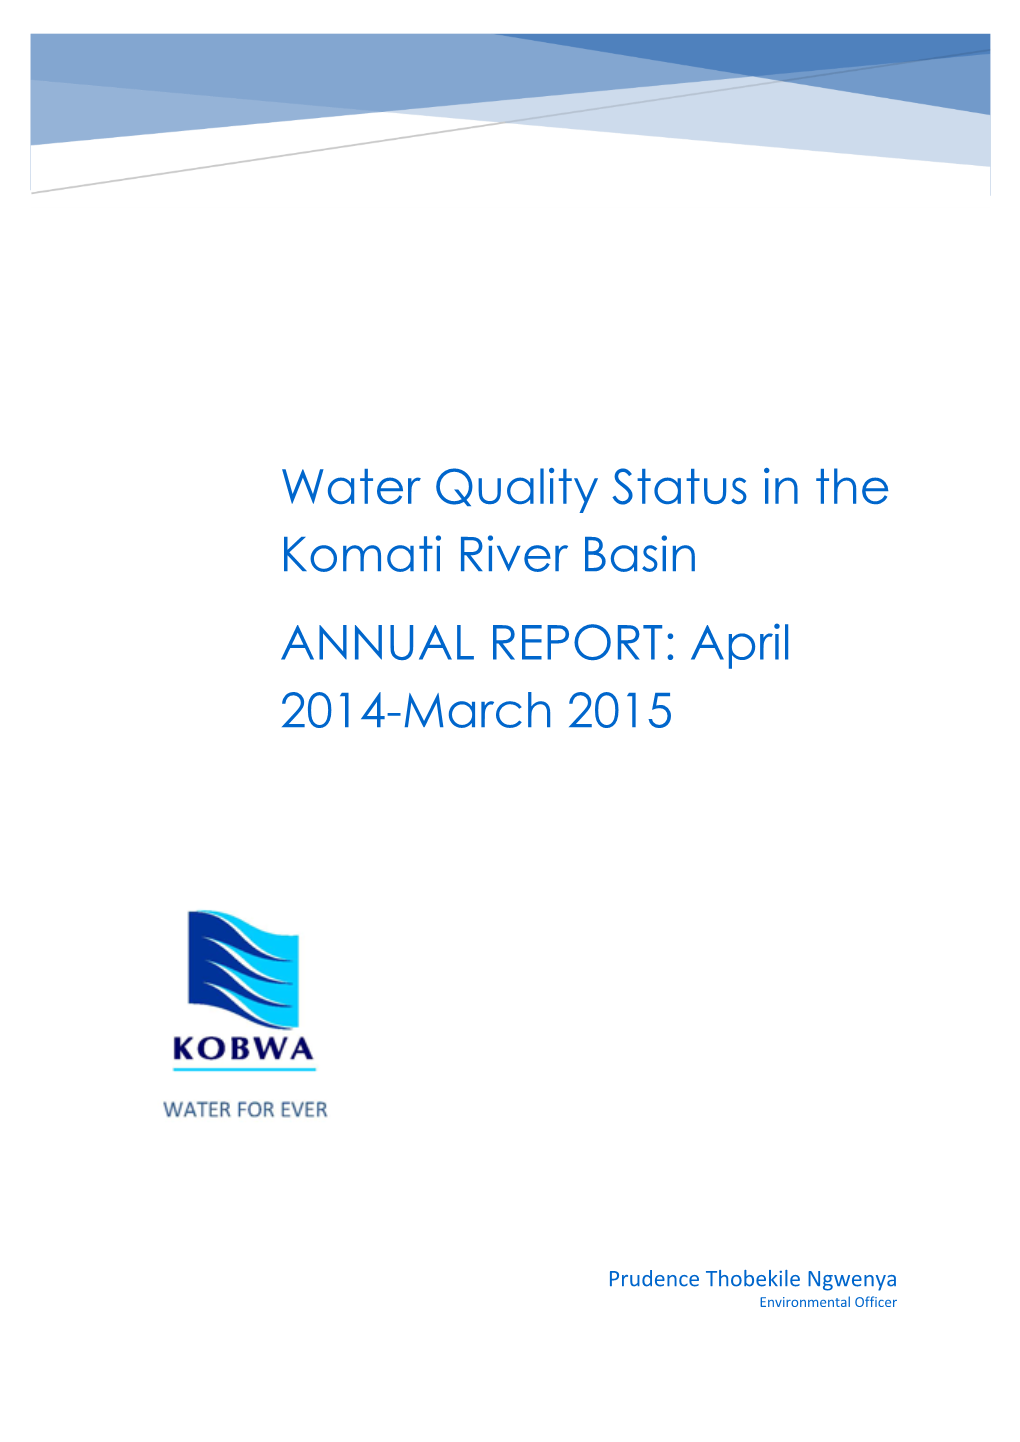 Water Quality Status in the Komati River Basin ANNUAL REPORT: April 2014-March 2015